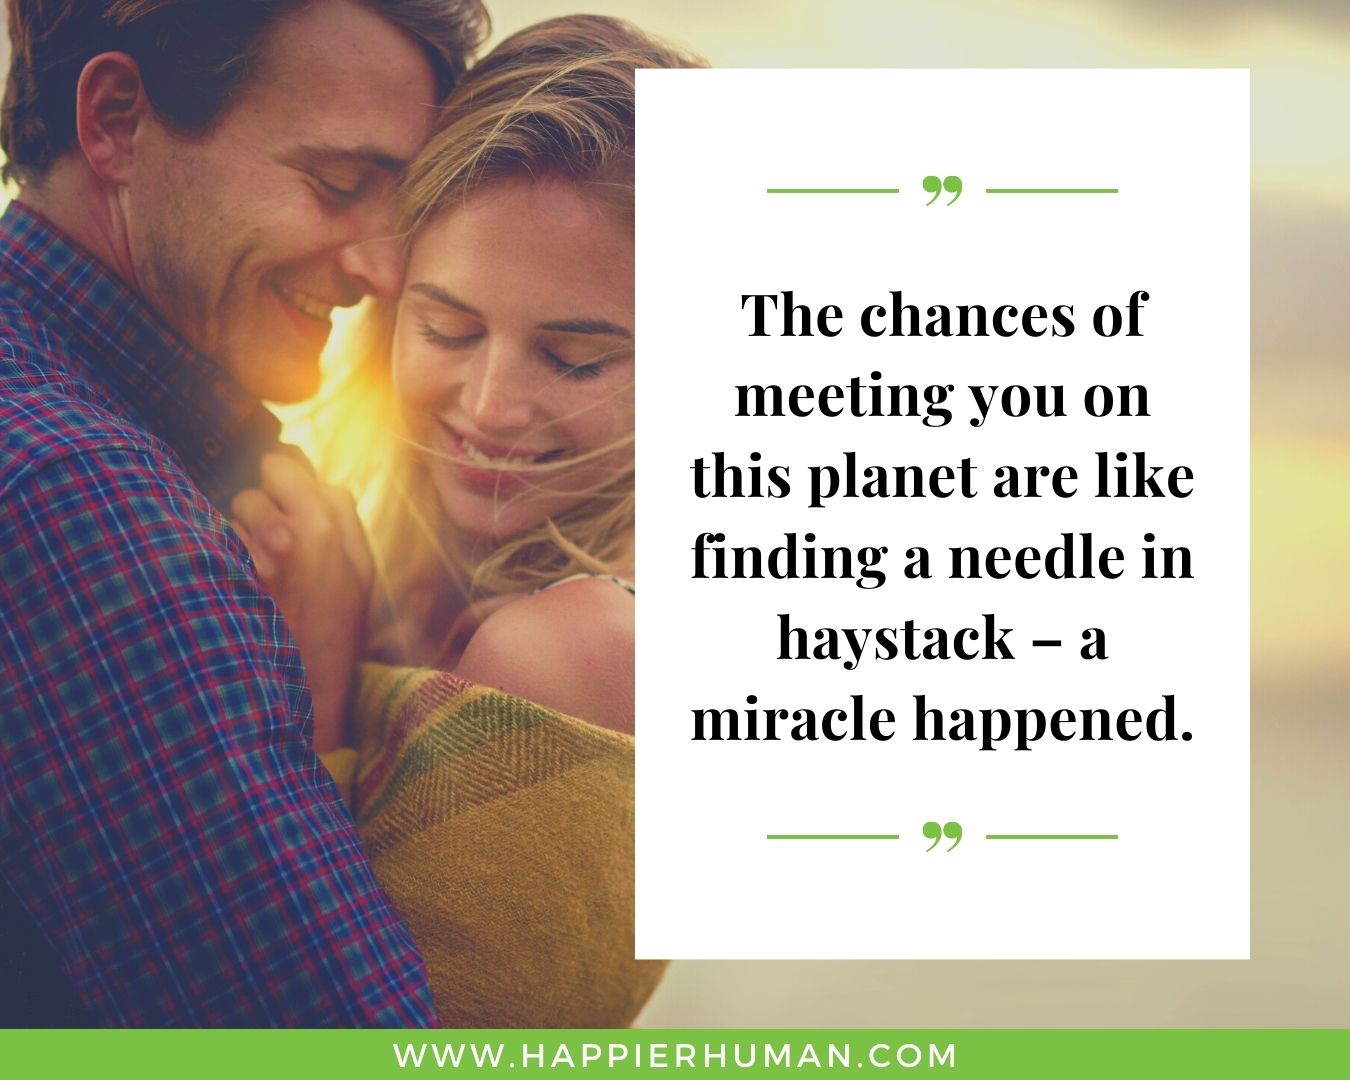 "The chances of meeting you on this planet are like finding a needle in haystack – a miracle happened.”